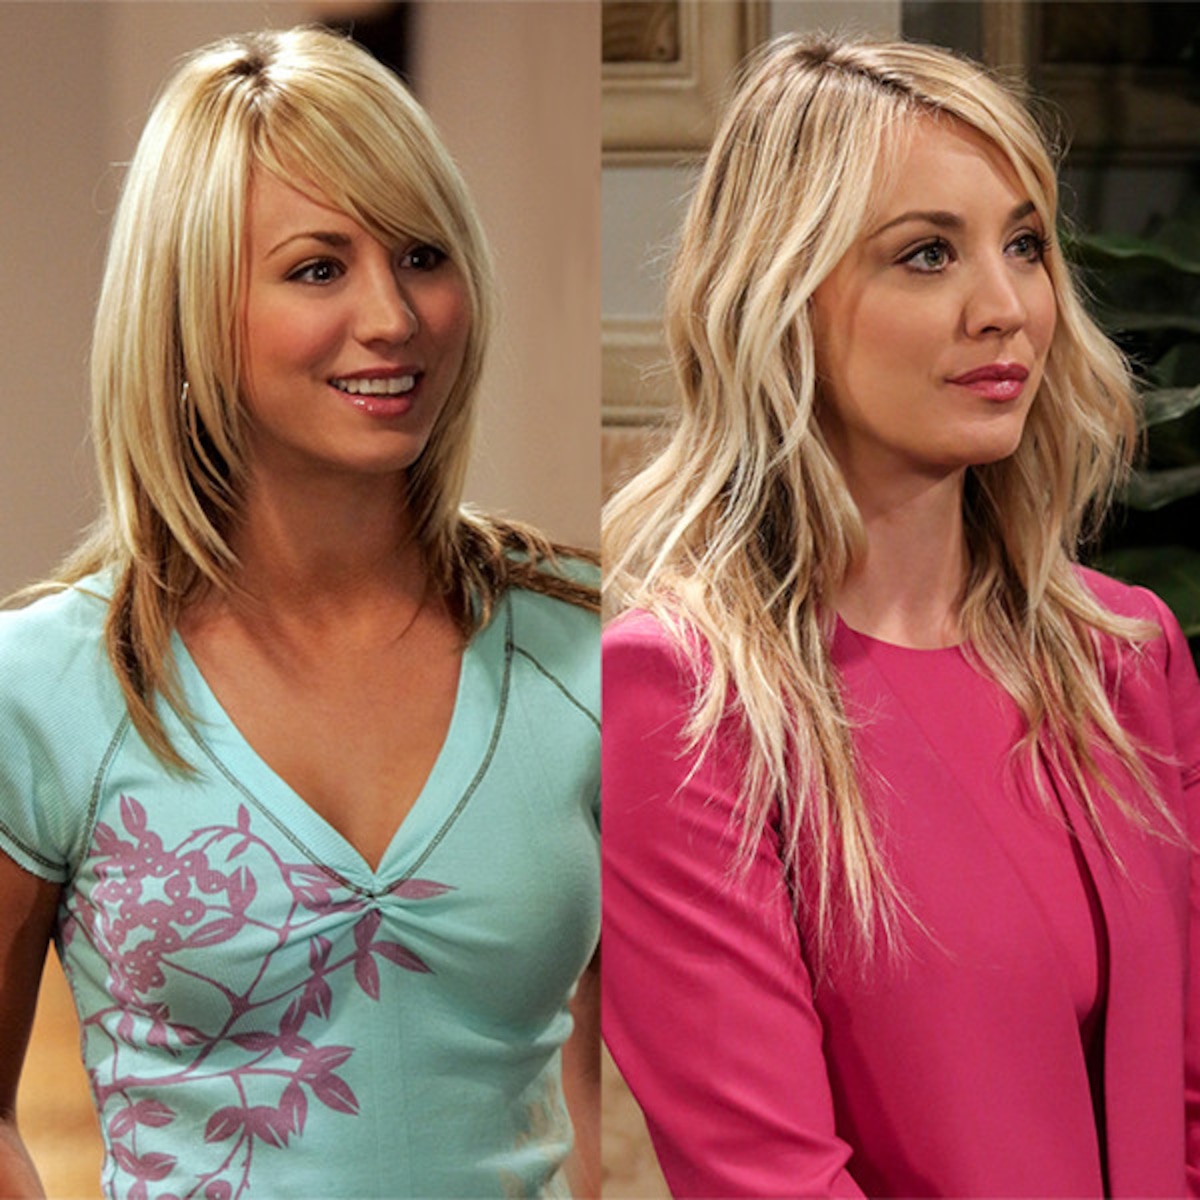 Kaley Cuoco Recalls Being Shocked When Ending Big Bang Theory E Online The big bang cast would make great supporting characters for any superhero or with some twists as heroes in their own right. ending big bang theory